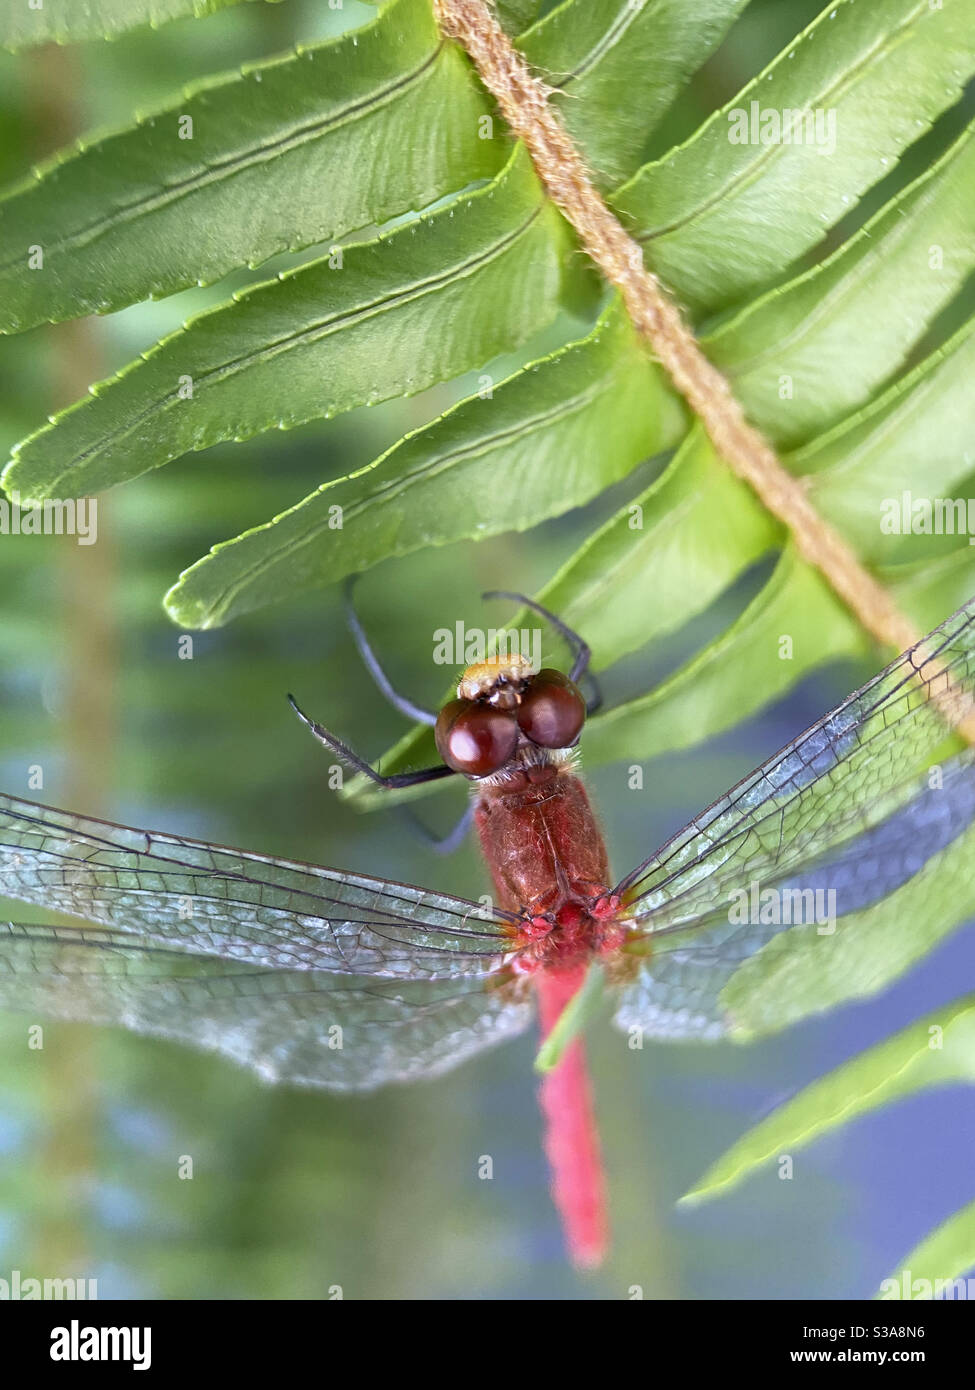 Up close of dragonfly Stock Photo